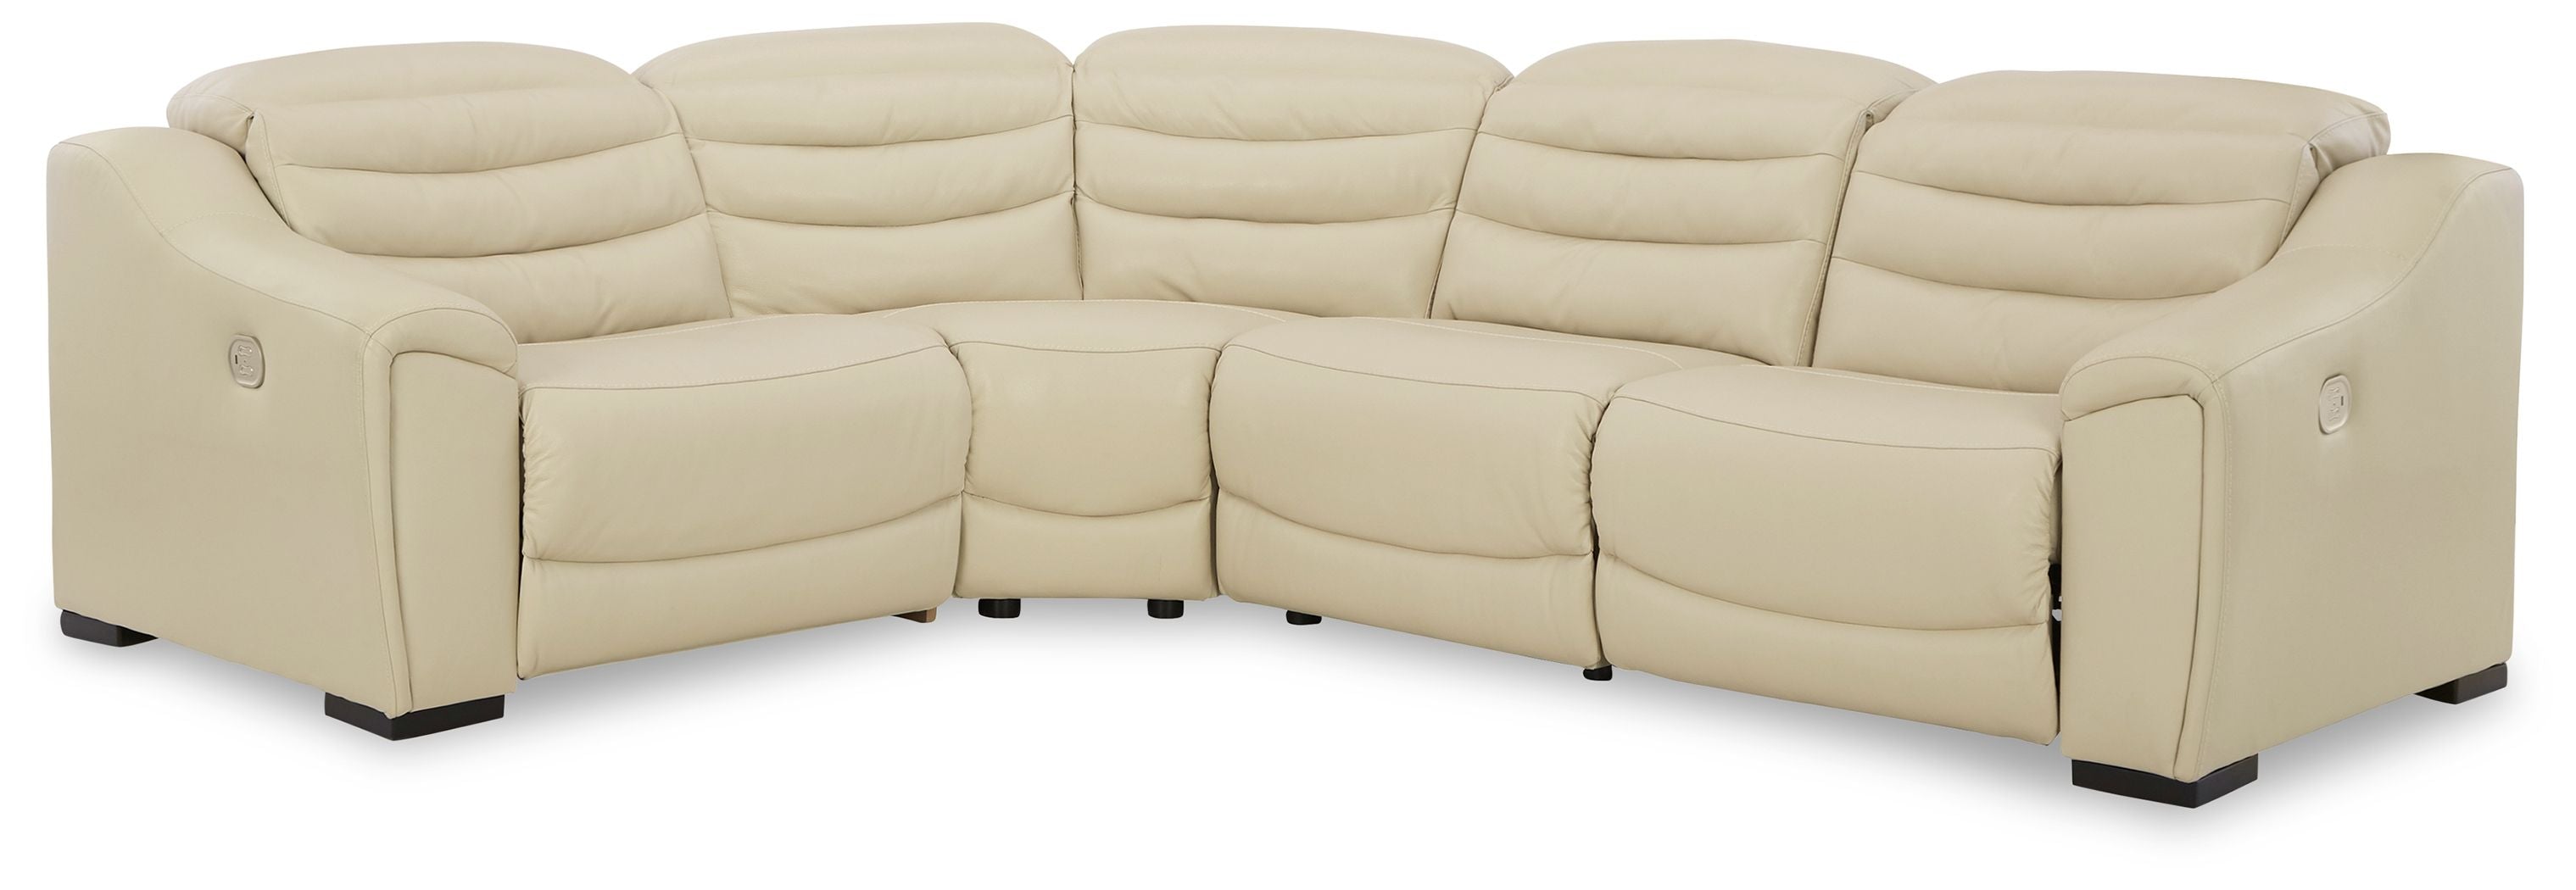 Center Line Leather Power Recliner Sectional